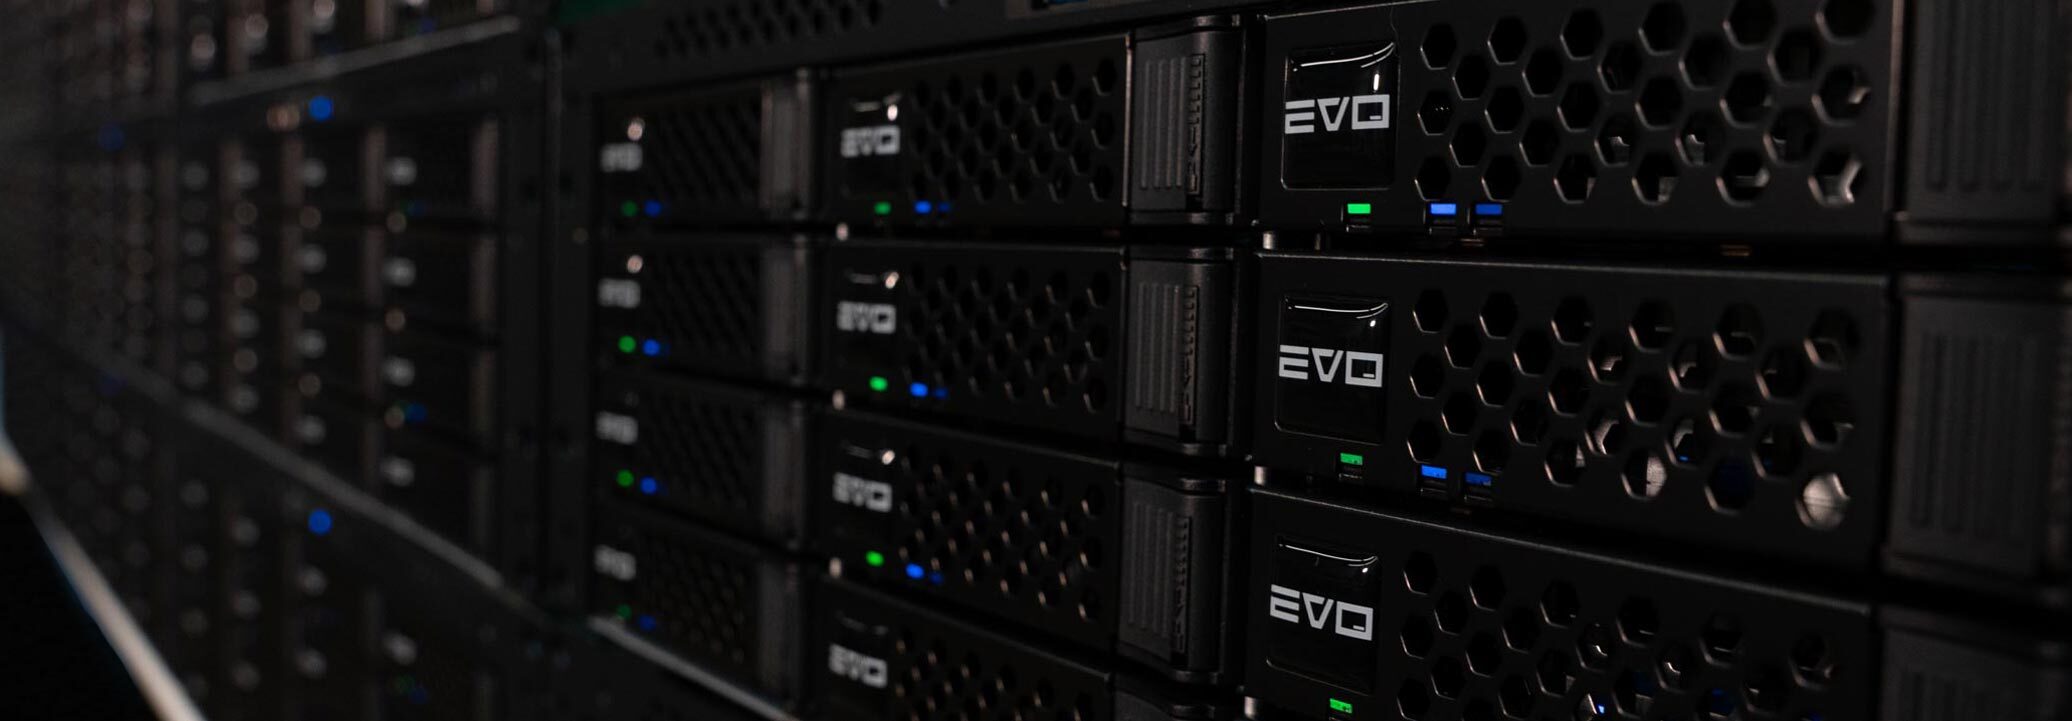 EVO Cluster system for nearline storage up to multiple petabytes